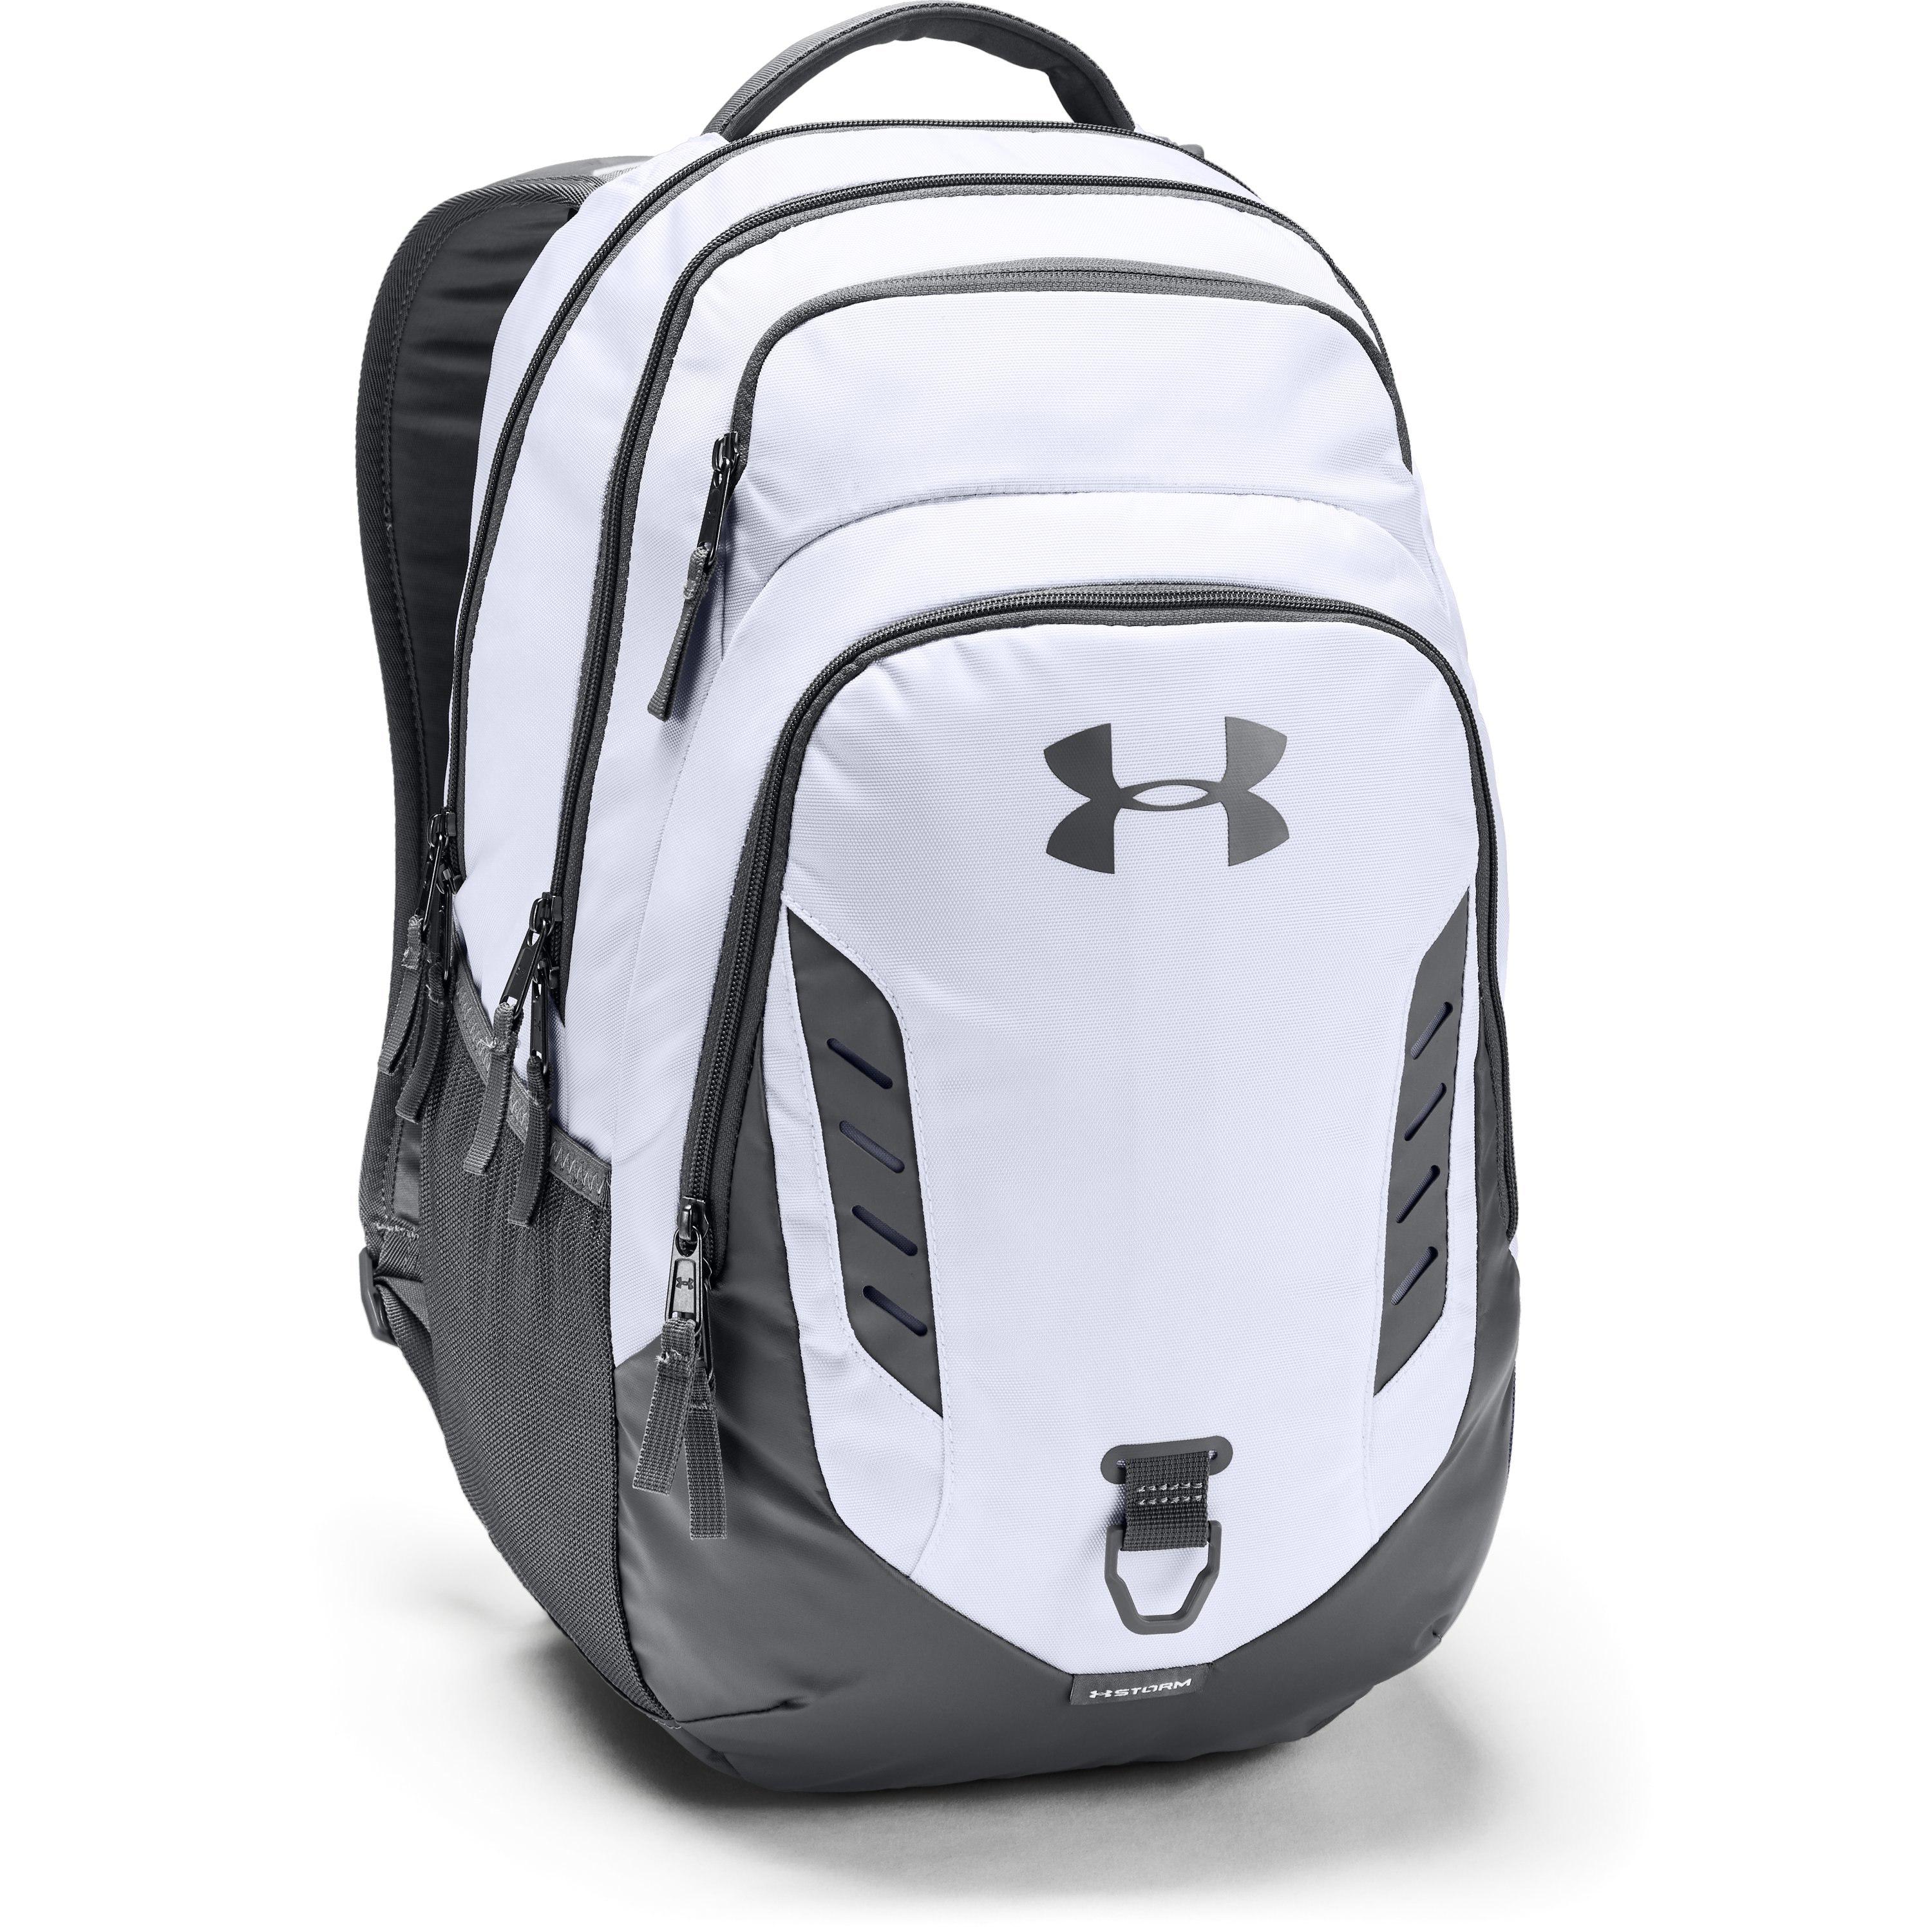 One Size Fits all 001 Under Armour Gameday Backpack /Silver Black 